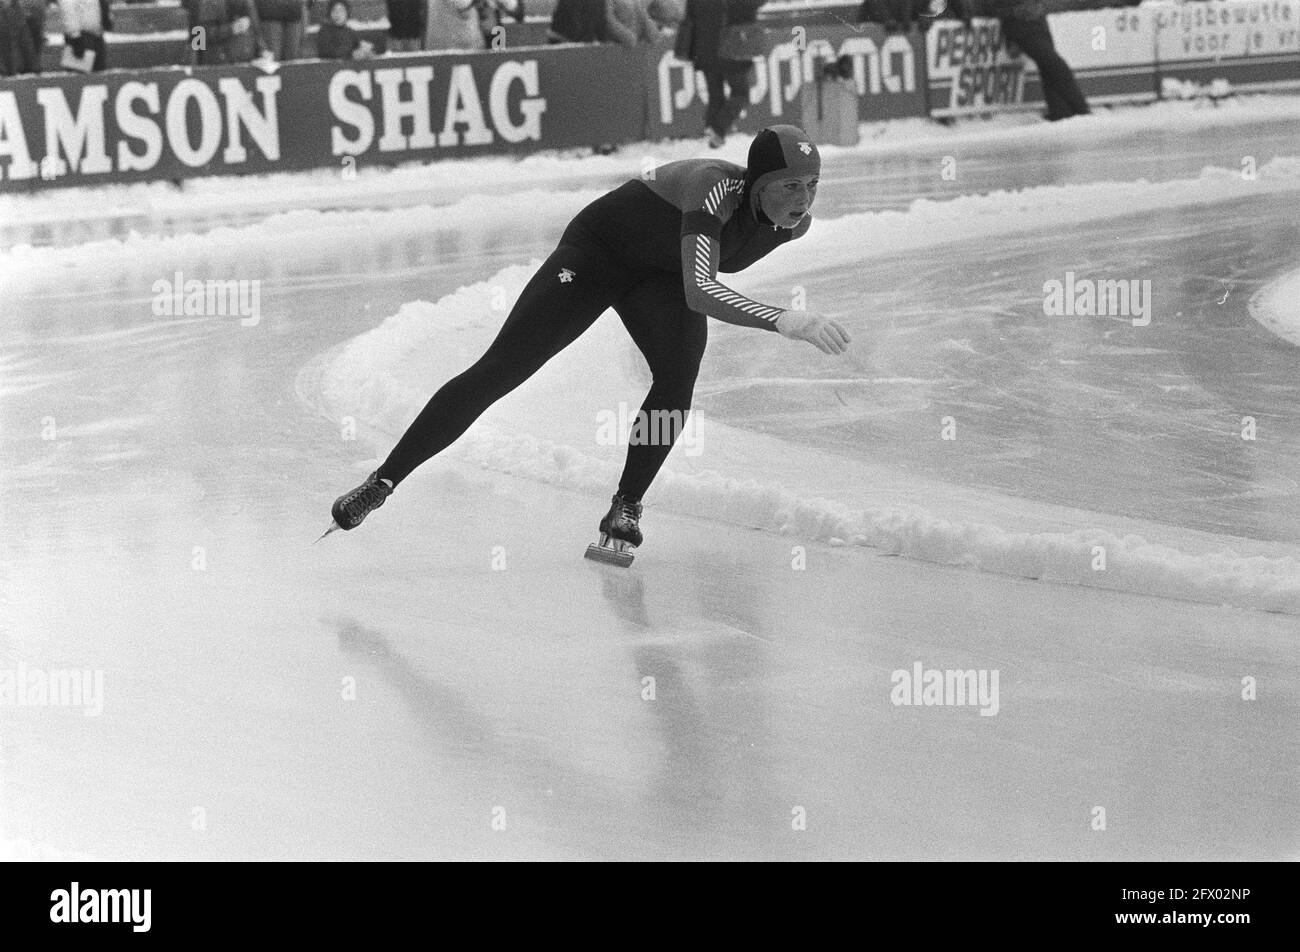 Skating international match between the Netherlands and Norway in Groningen. Ria Visser in action at the 3000 meter., December 19, 1981, skating, sport, The Netherlands, 20th century press agency photo, news to remember, documentary, historic photography 1945-1990, visual stories, human history of the Twentieth Century, capturing moments in time Stock Photo